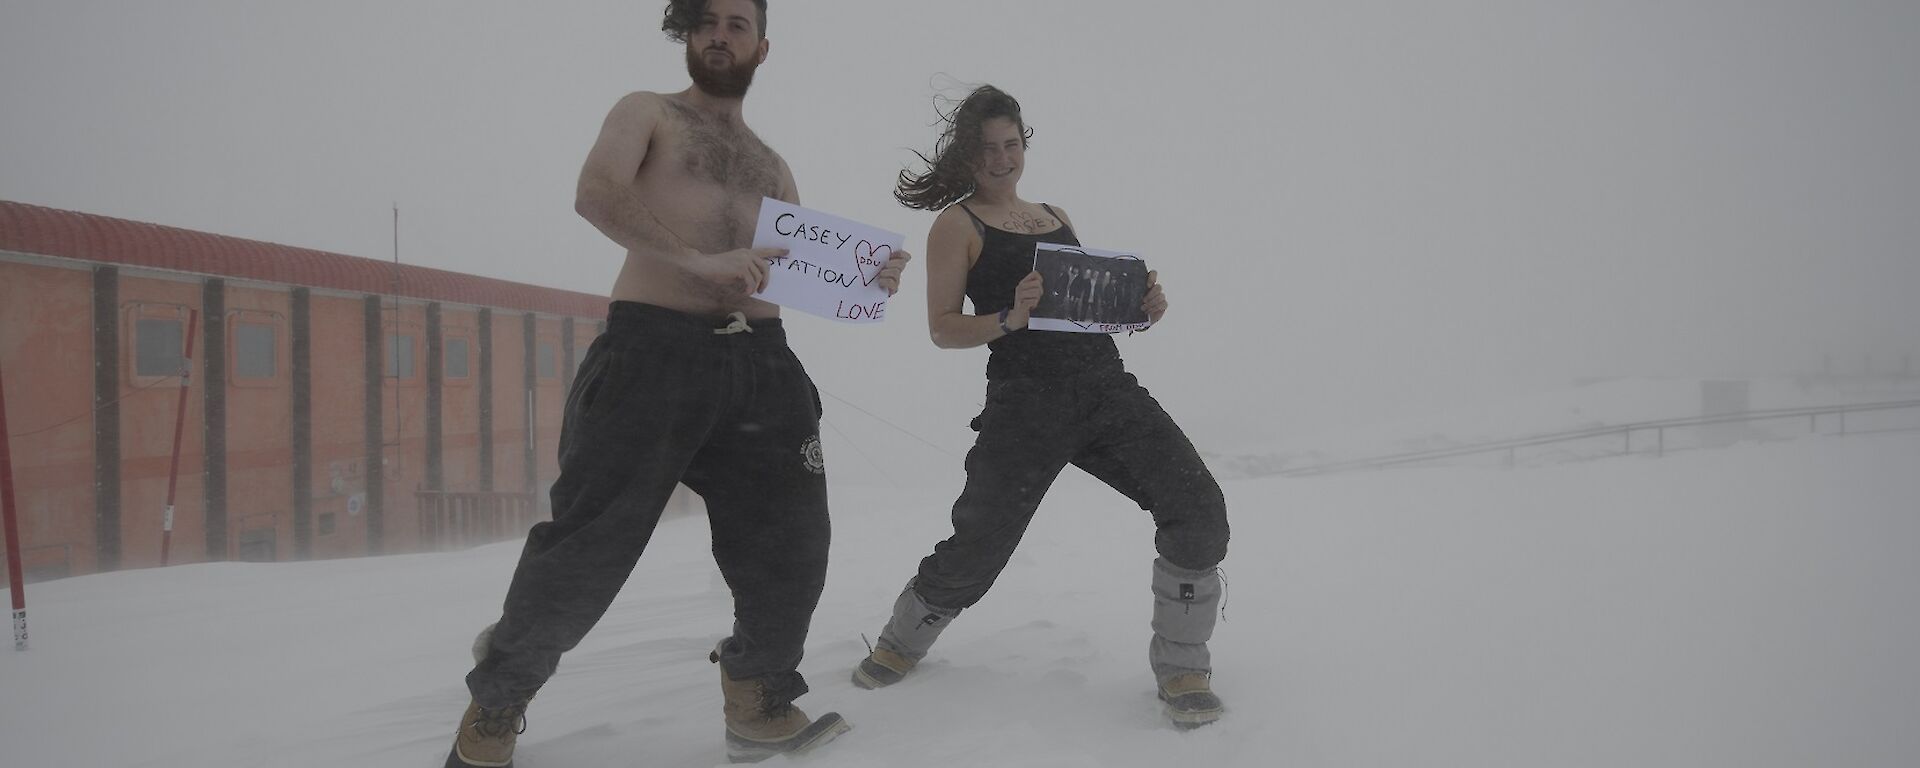 Two expeditioners in snow.